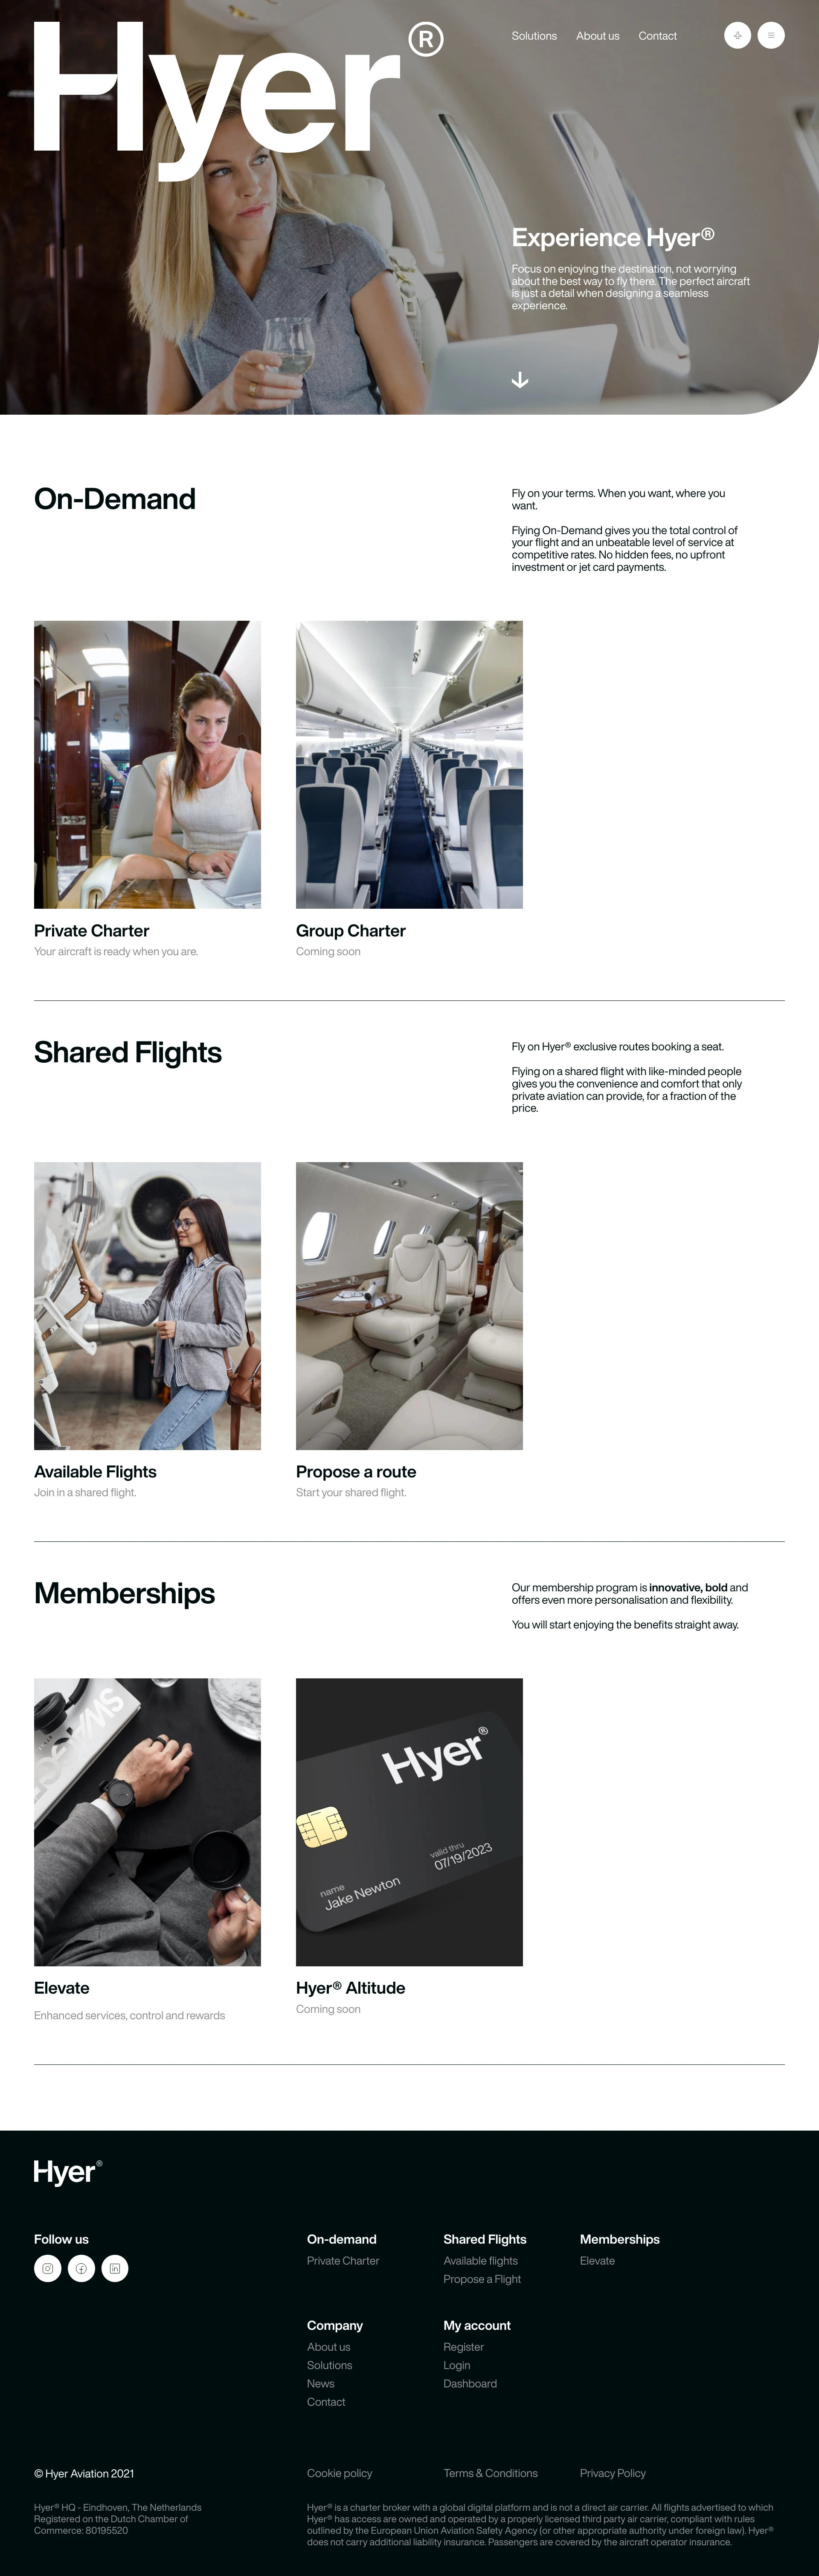 HYER Landing Page Example: We believe that in a world where passengers have become numbers, a personal approach is key to ensure you get the most out of your flying experience.